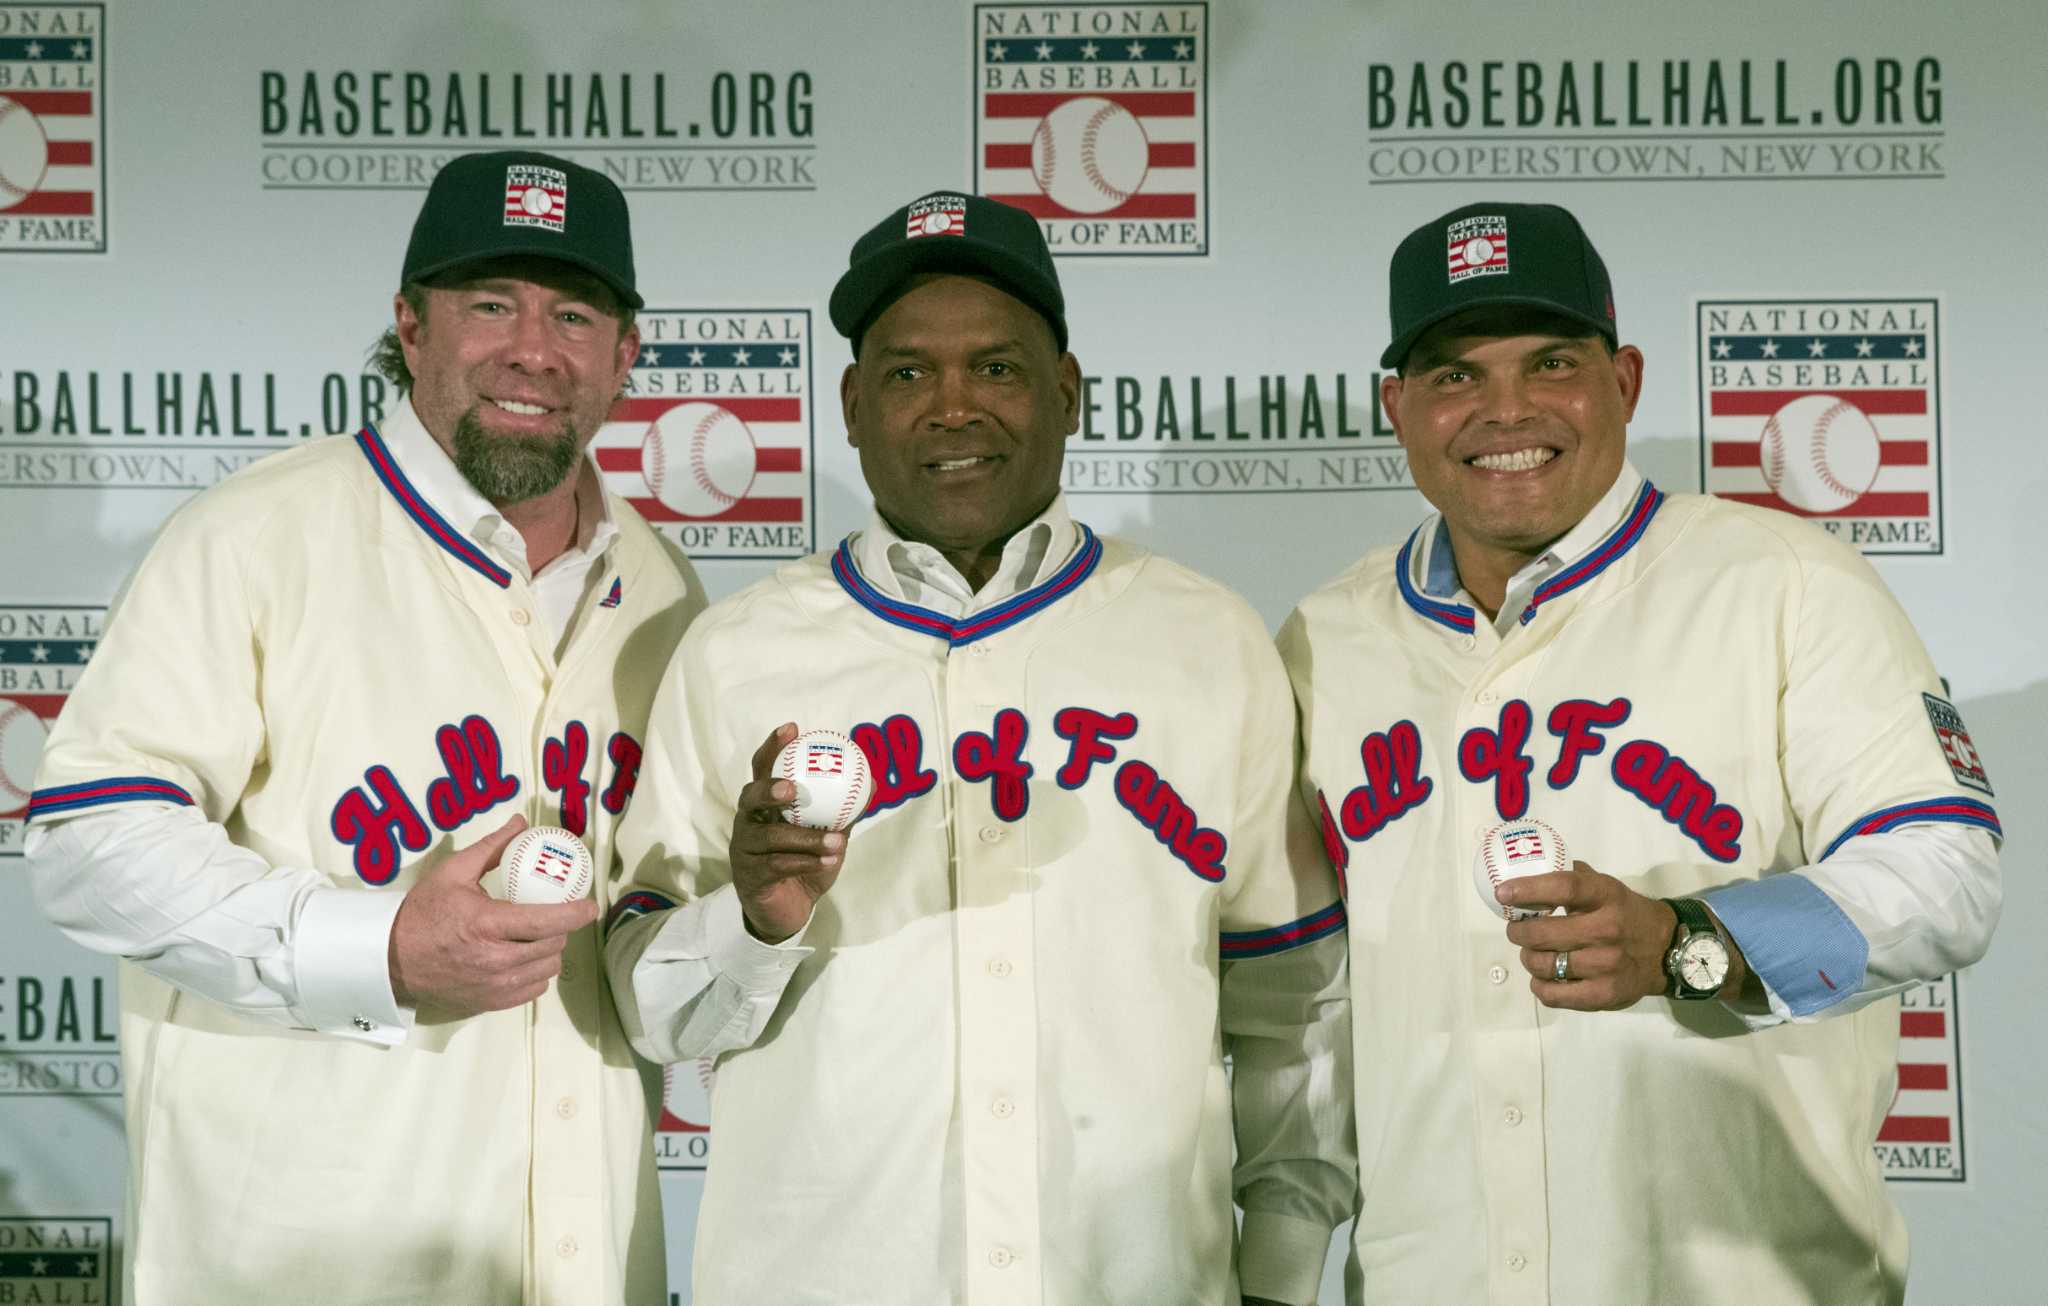 Tim Raines is a Hall of Famer, and the numbers couldn't be more